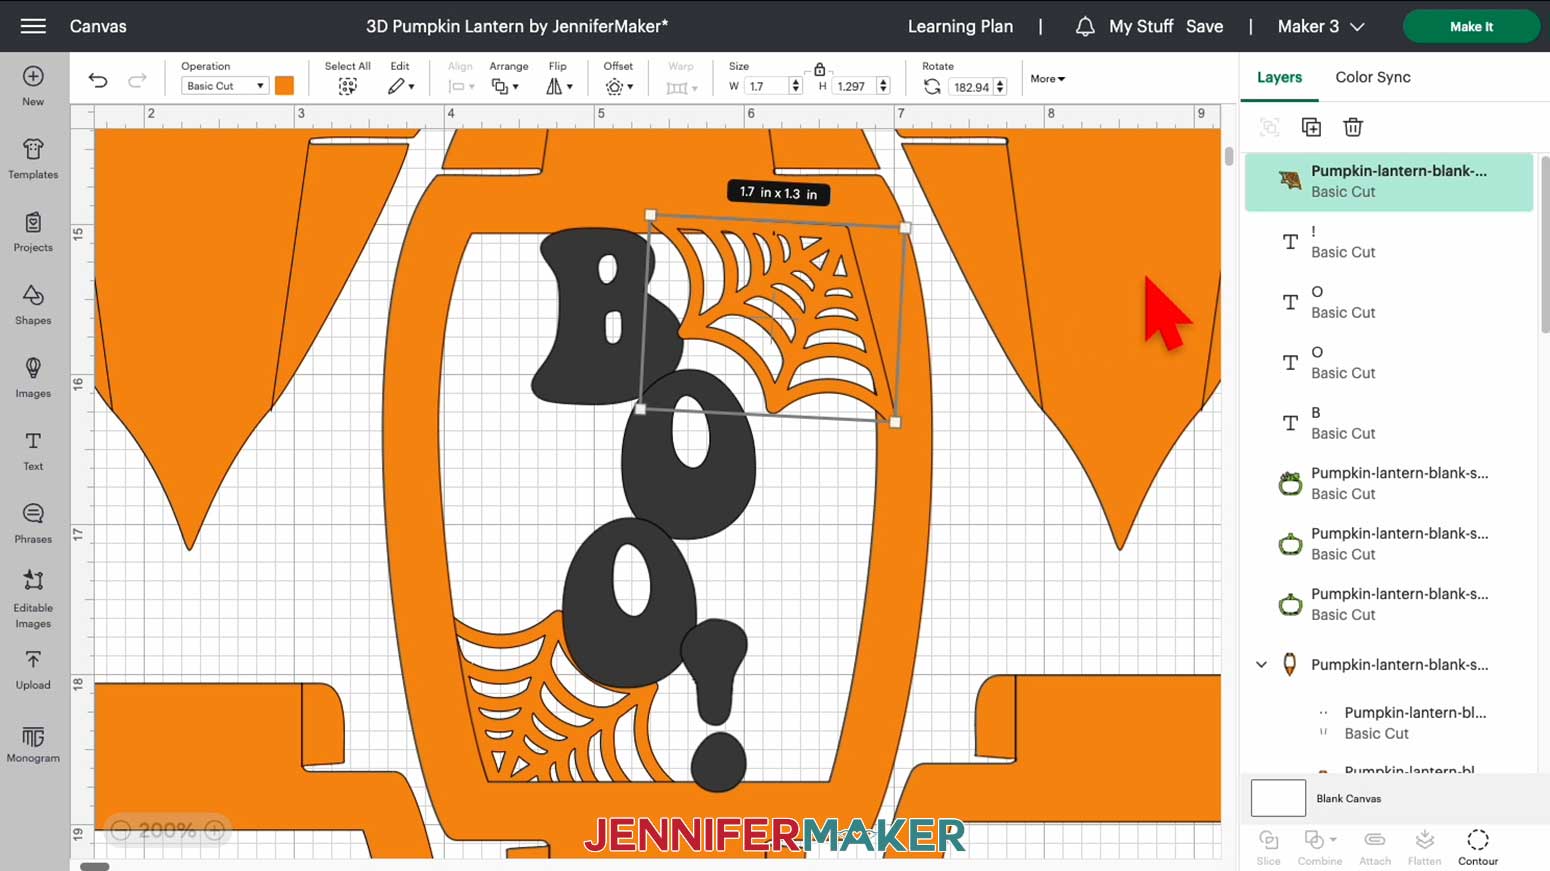 Position the spiderweb elements around the word "boo!" for a customized 3D pumpkin lantern decorative panel